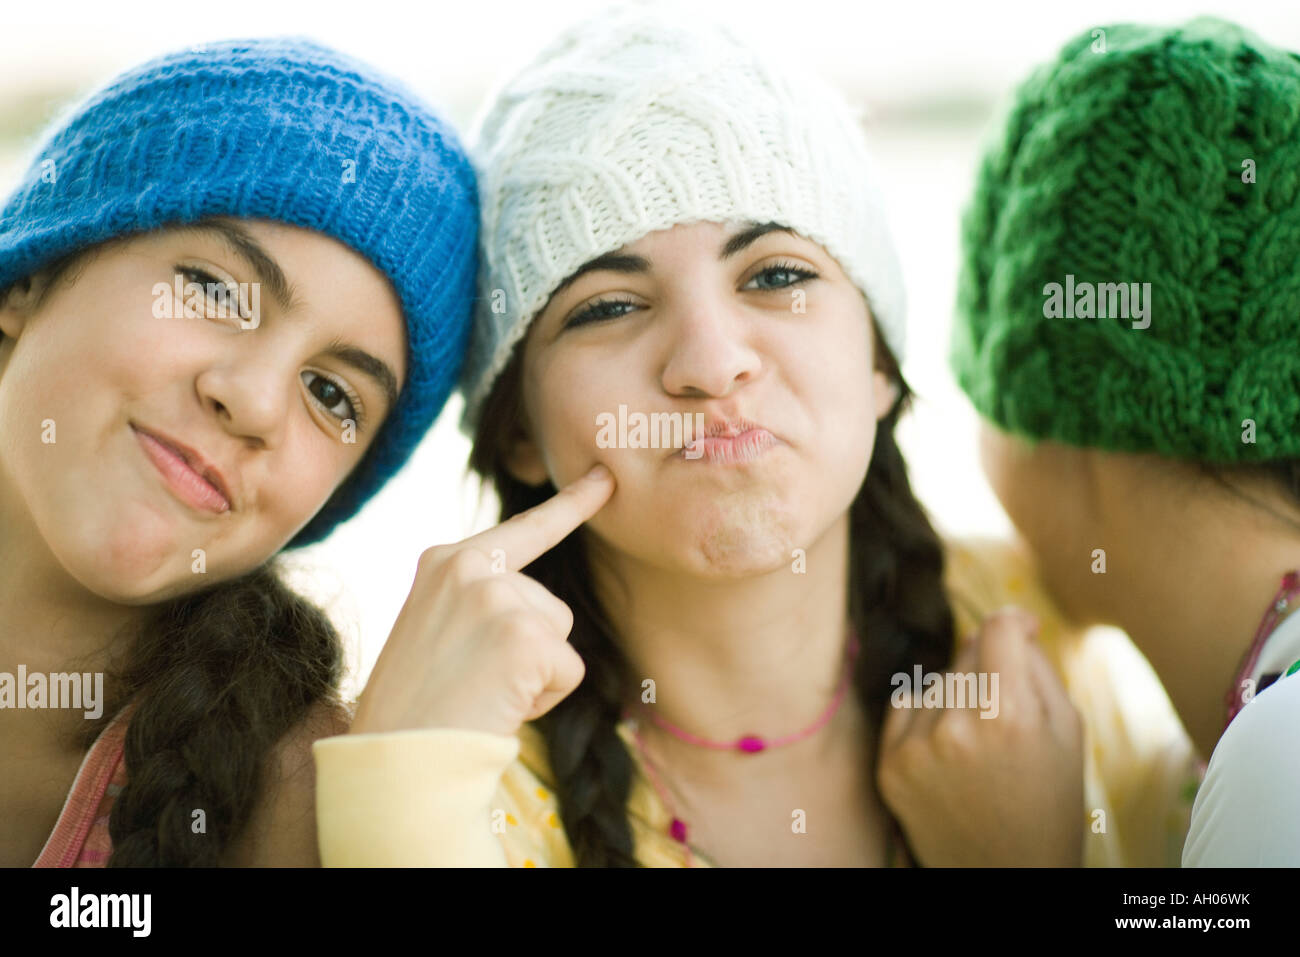 Young female friends wearing knit hats, making faces Stock Photo